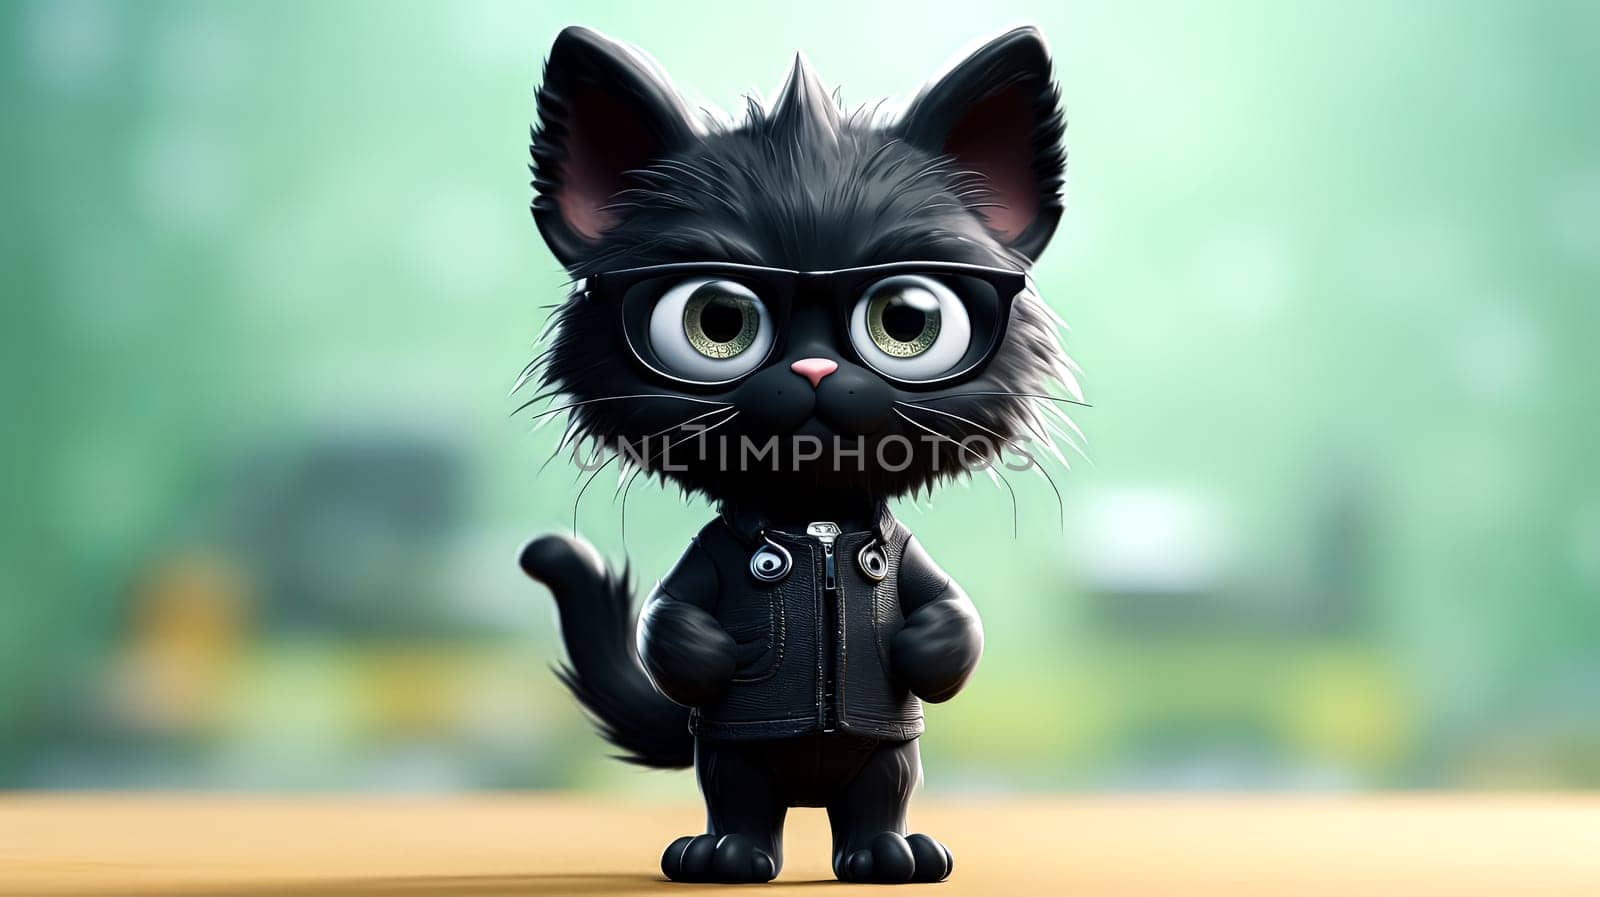 A cartoon cat wearing a leather jacket and glasses stands in front of a yellow background. The cat's outfit gives it a cool and stylish appearance